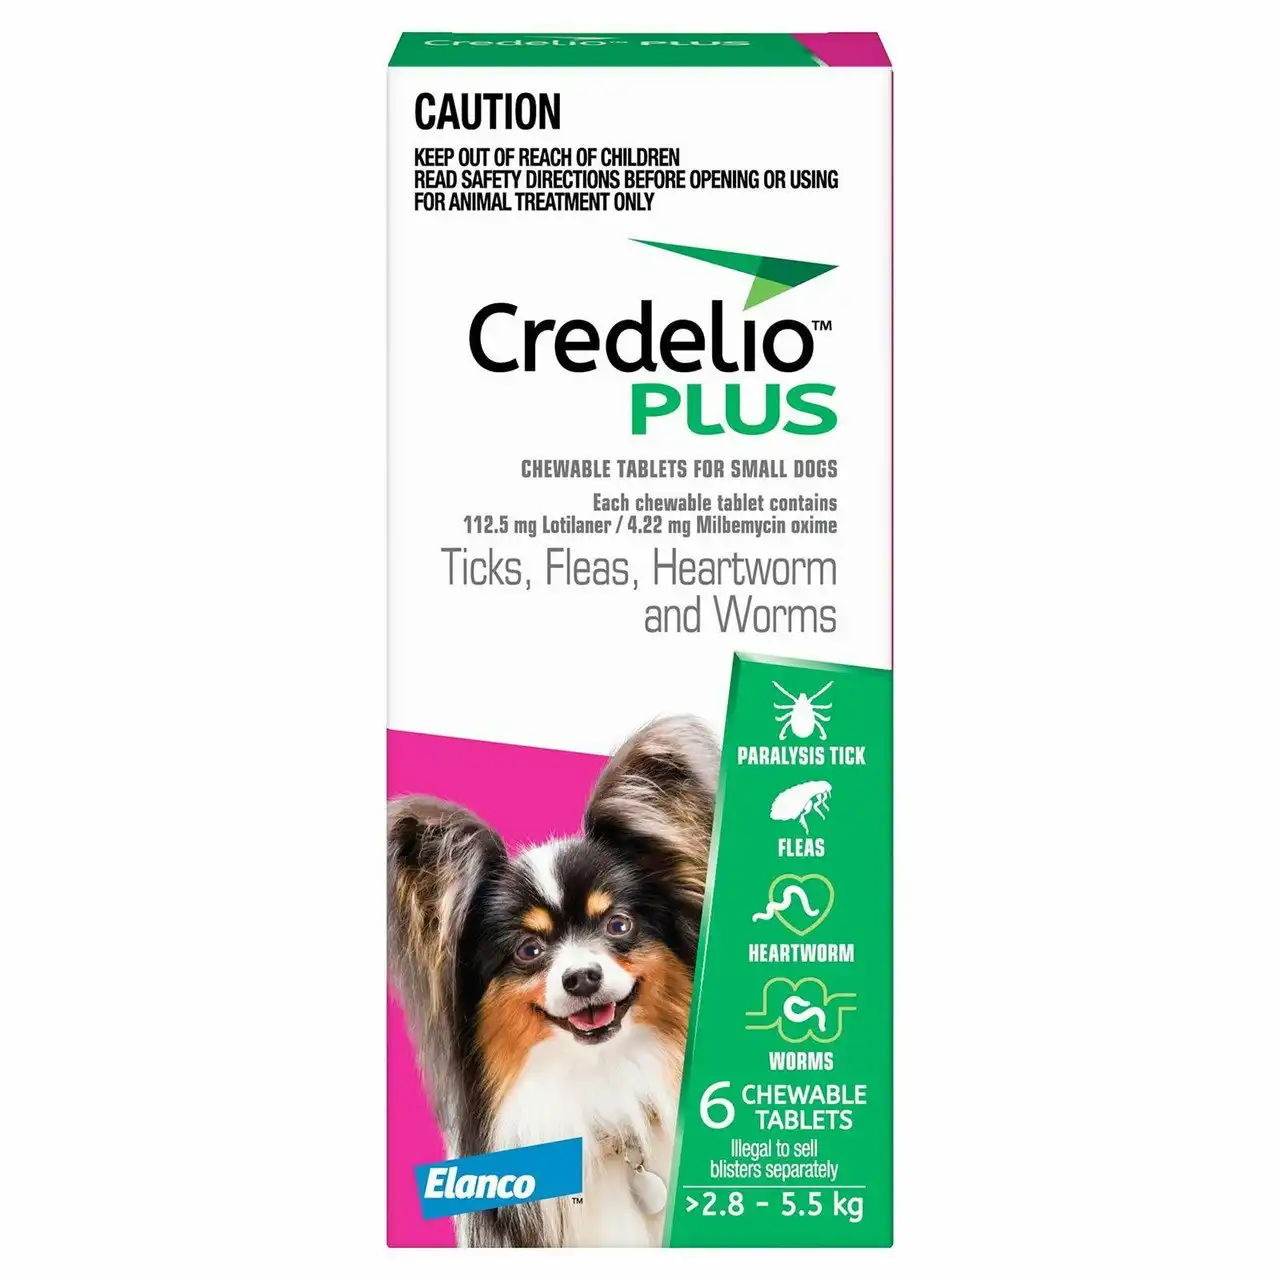 Credelio PLUS Ticks, Fleas, Mites, Heartworm & Worms for Small Dogs 2.8 - 5.5 kg - 3 Pack